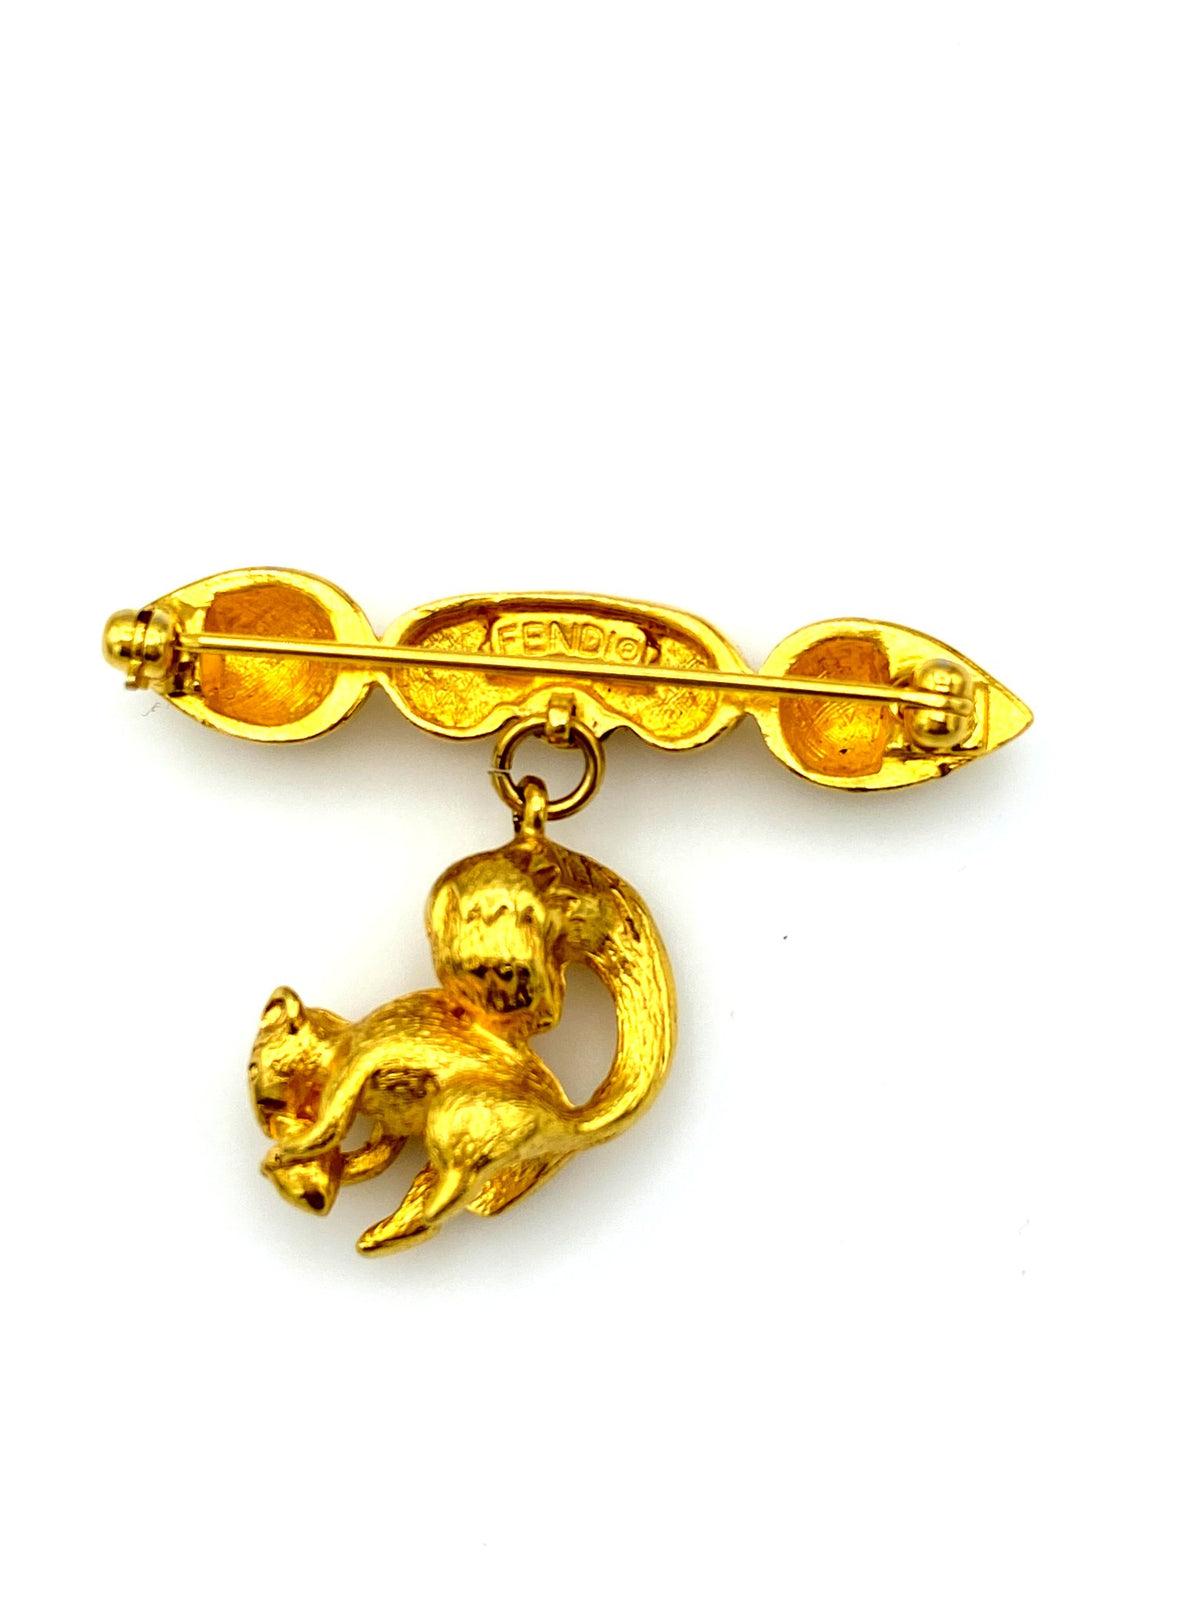 Fendi Iconic Gold Logo Squirrel Charm Vintage Brooch - 24 Wishes Vintage Jewelry